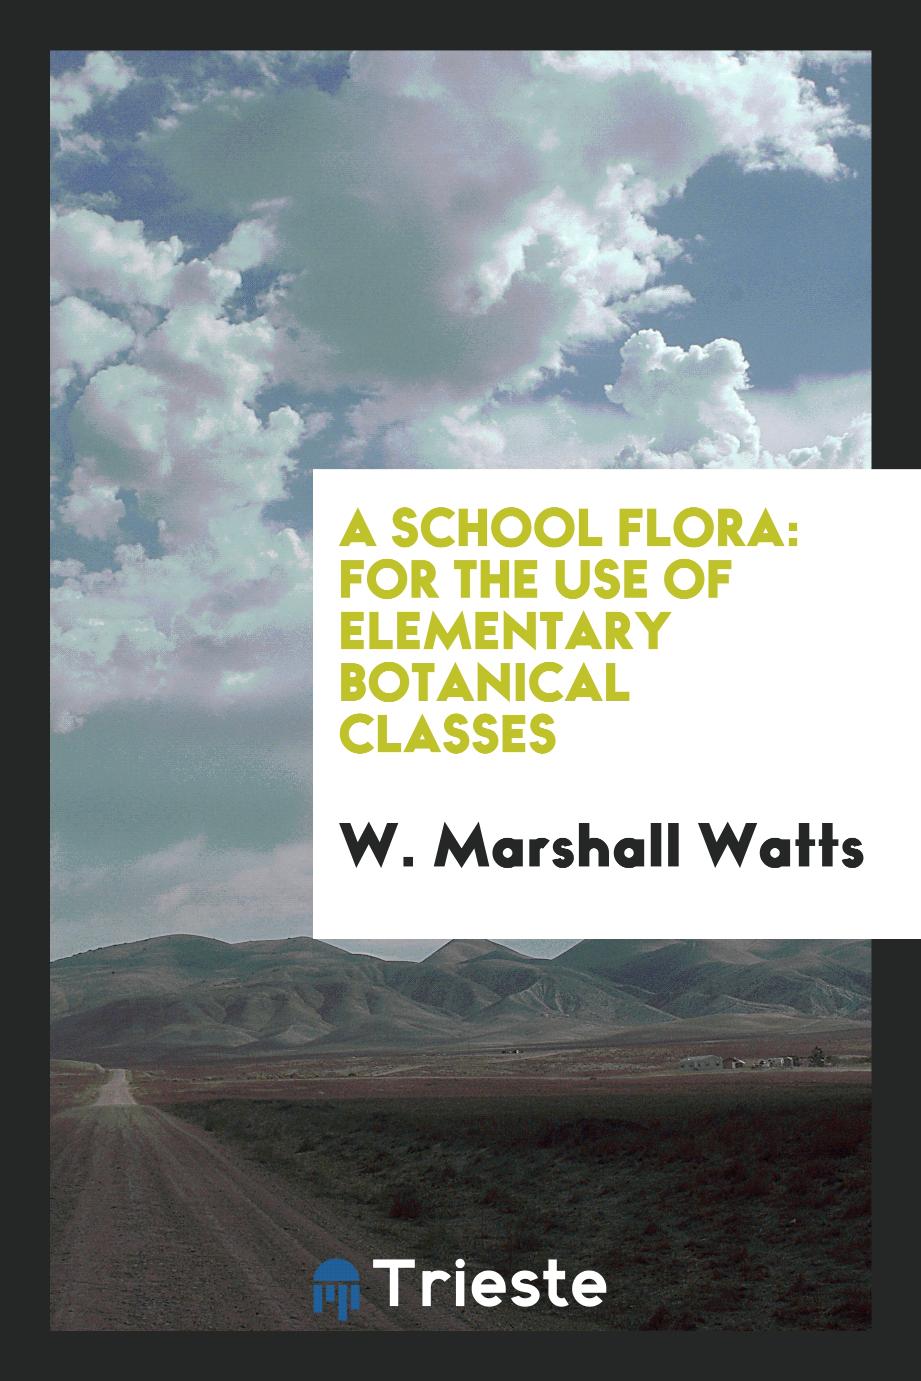 A school flora: for the use of elementary botanical classes